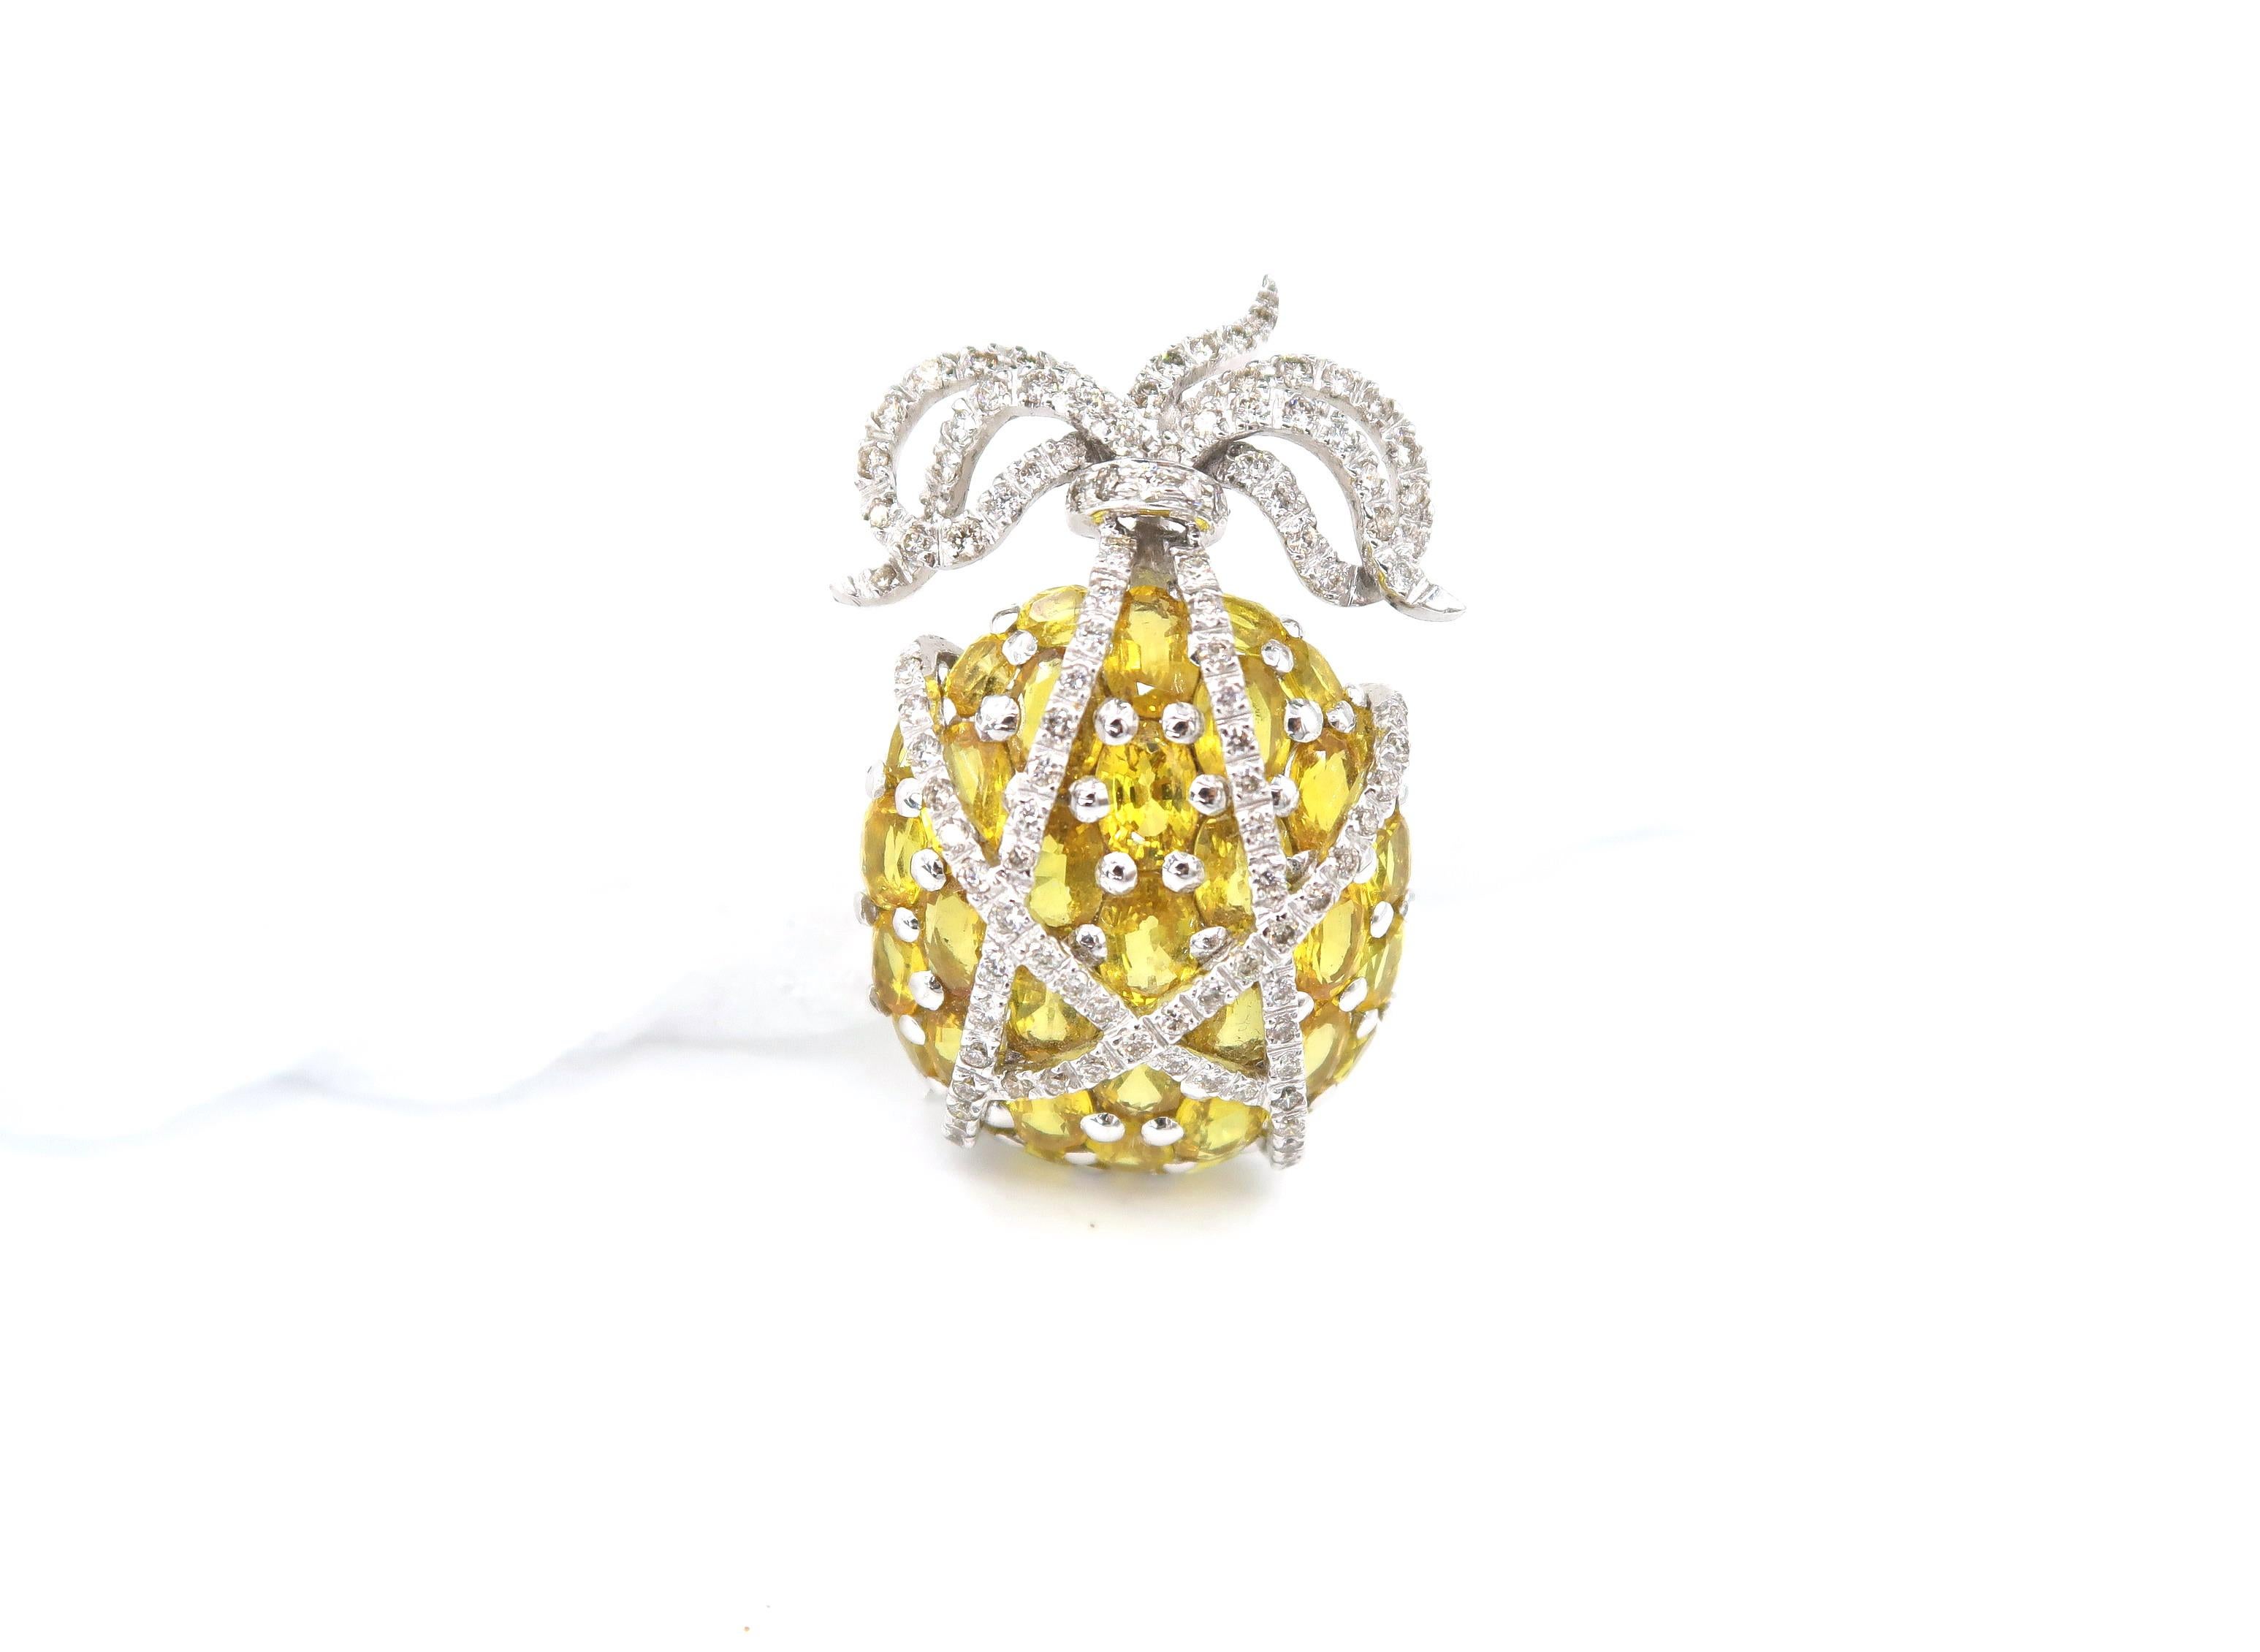 Clustered Yellow Sapphire and Diamond Pineanpple Pendant and/or Brooch in 18K White Gold

Height: Approx. 4 cms.

Diamond: 1.45ct.
Yellow Sapphire: 10.82cts.
Gold: 18K White Gold 15.049g.